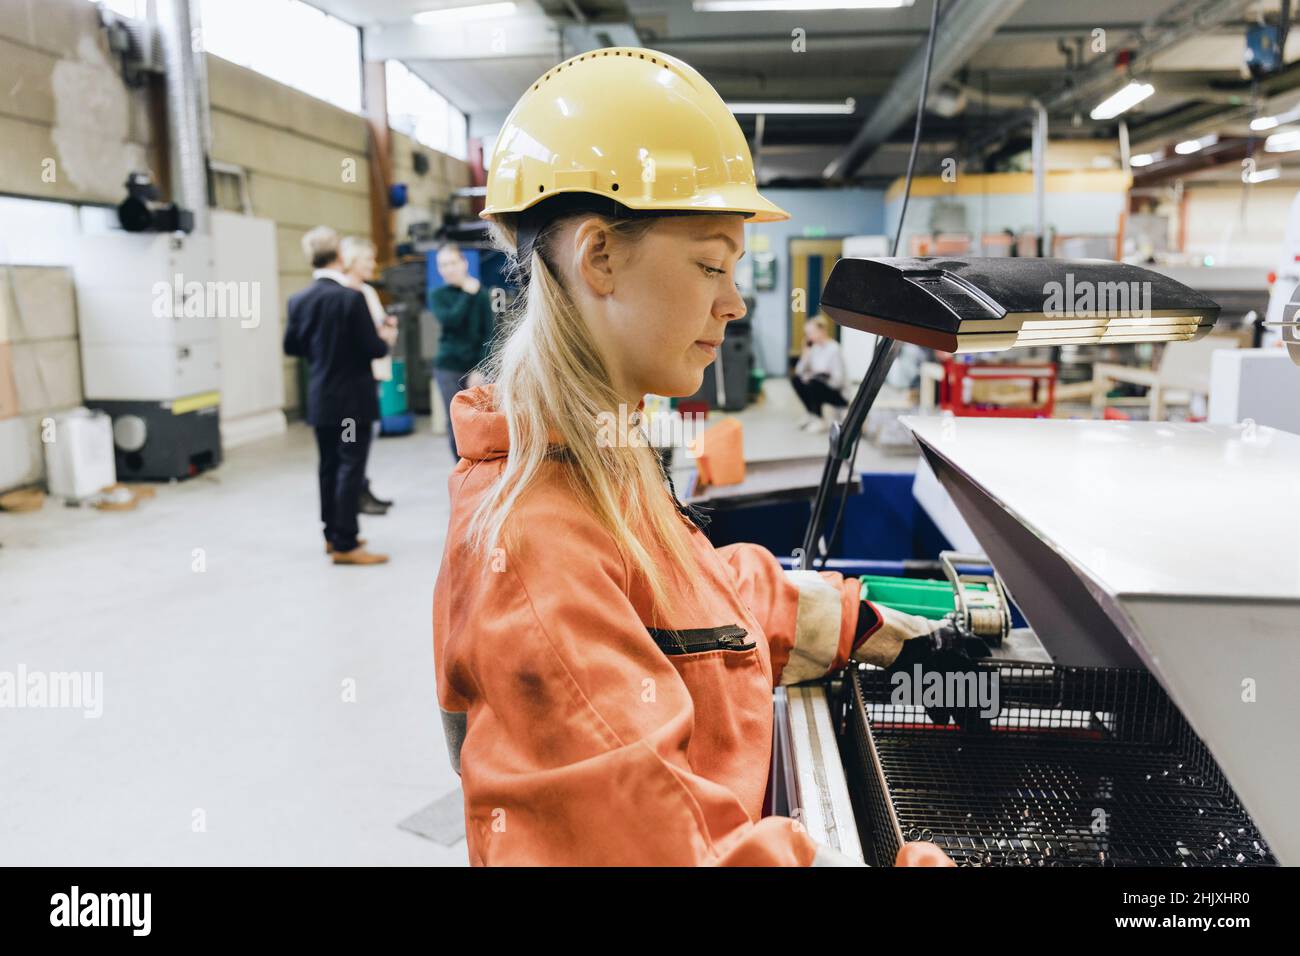 Side view of female blue-collar worker in hardhat using machinery in factory Stock Photo